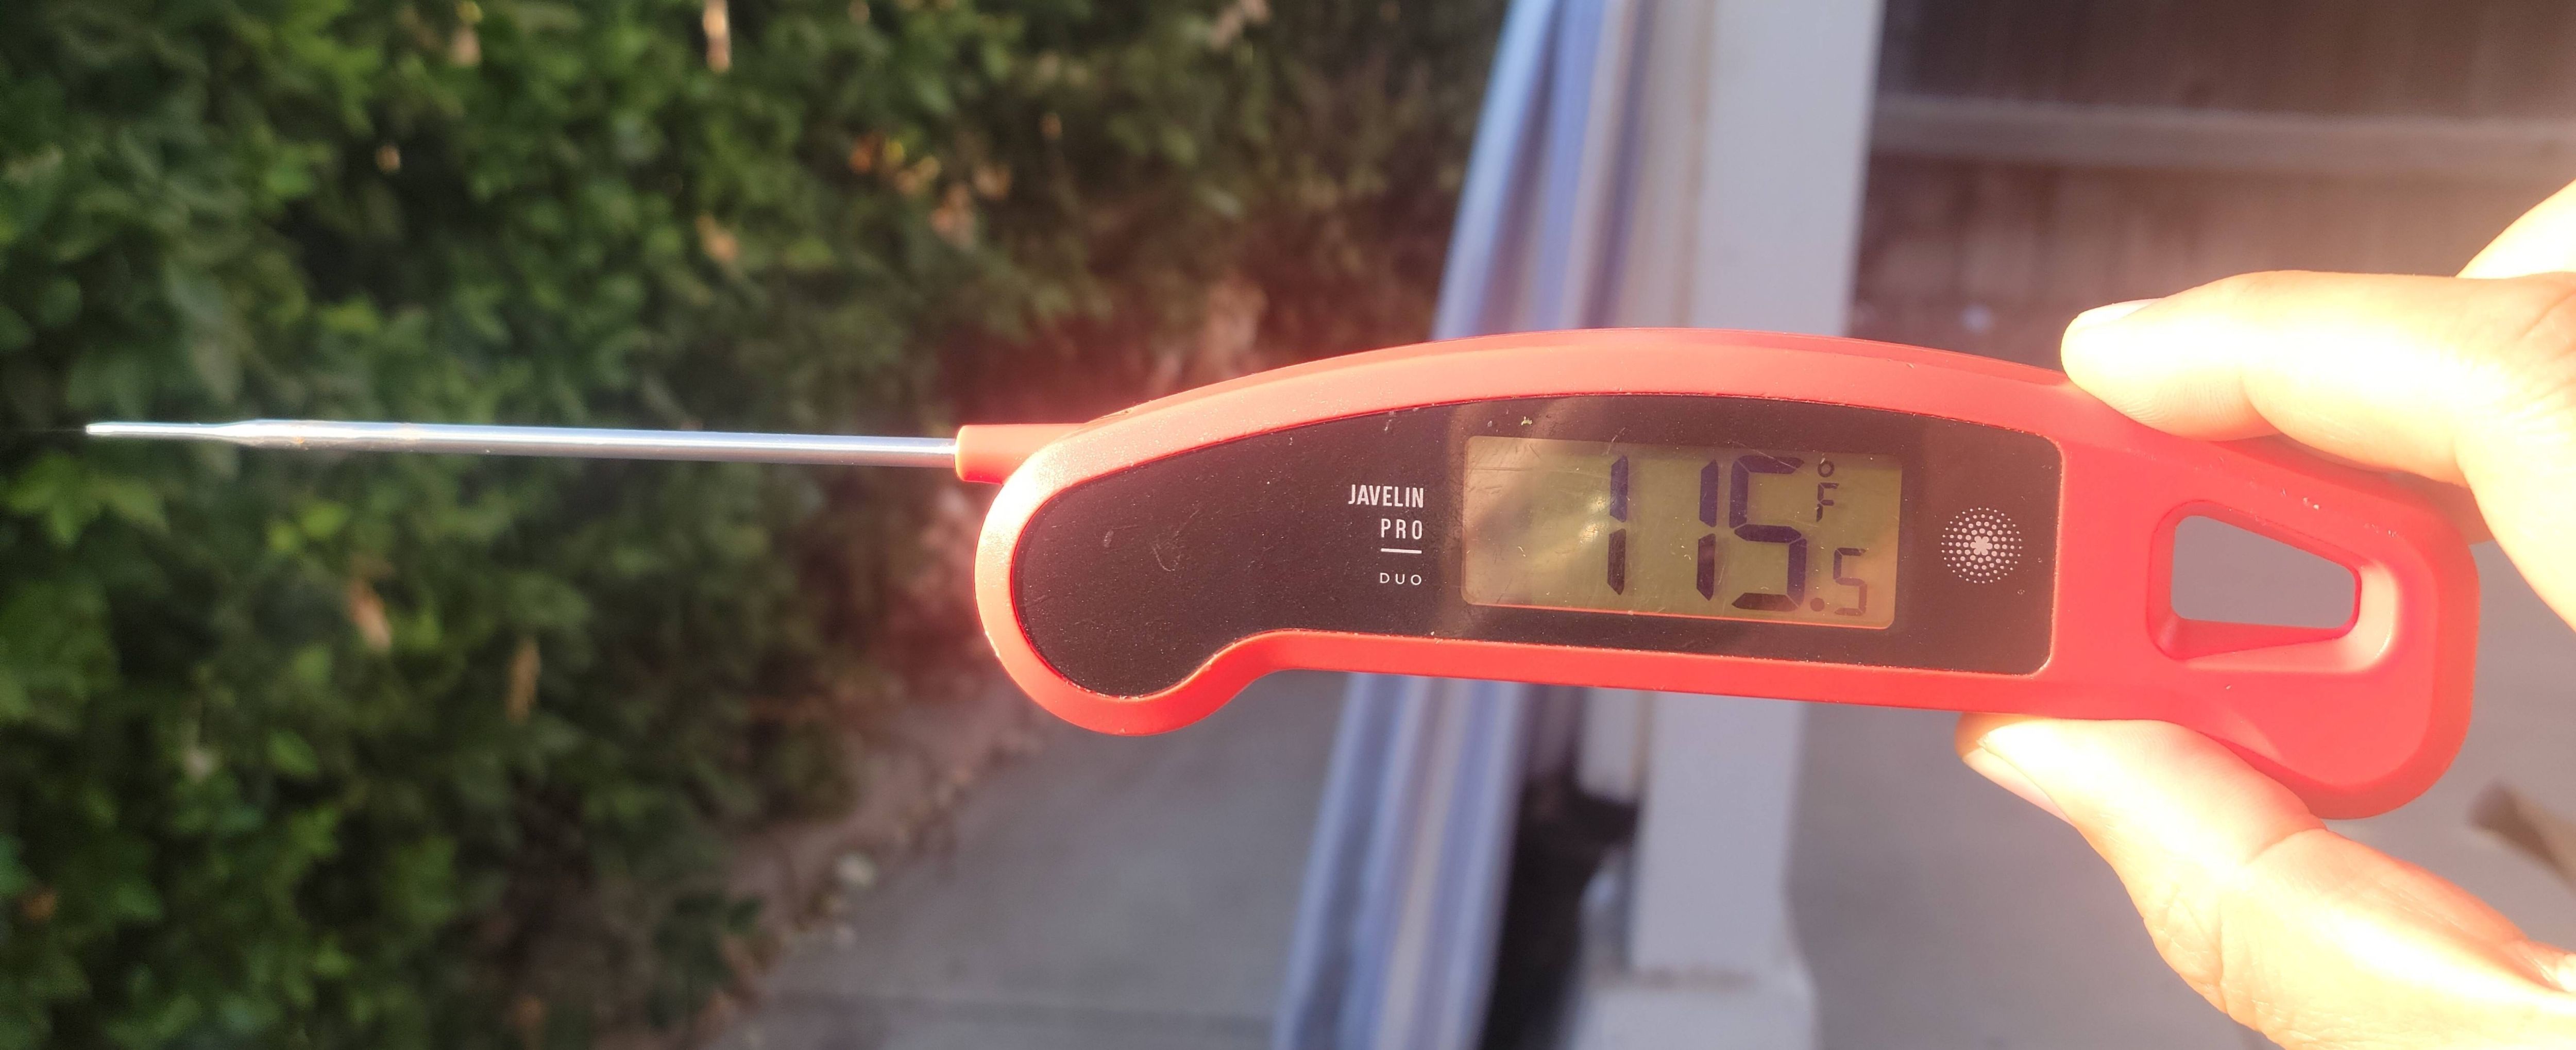 California is so hot you can use your meat thermometer to check the weather